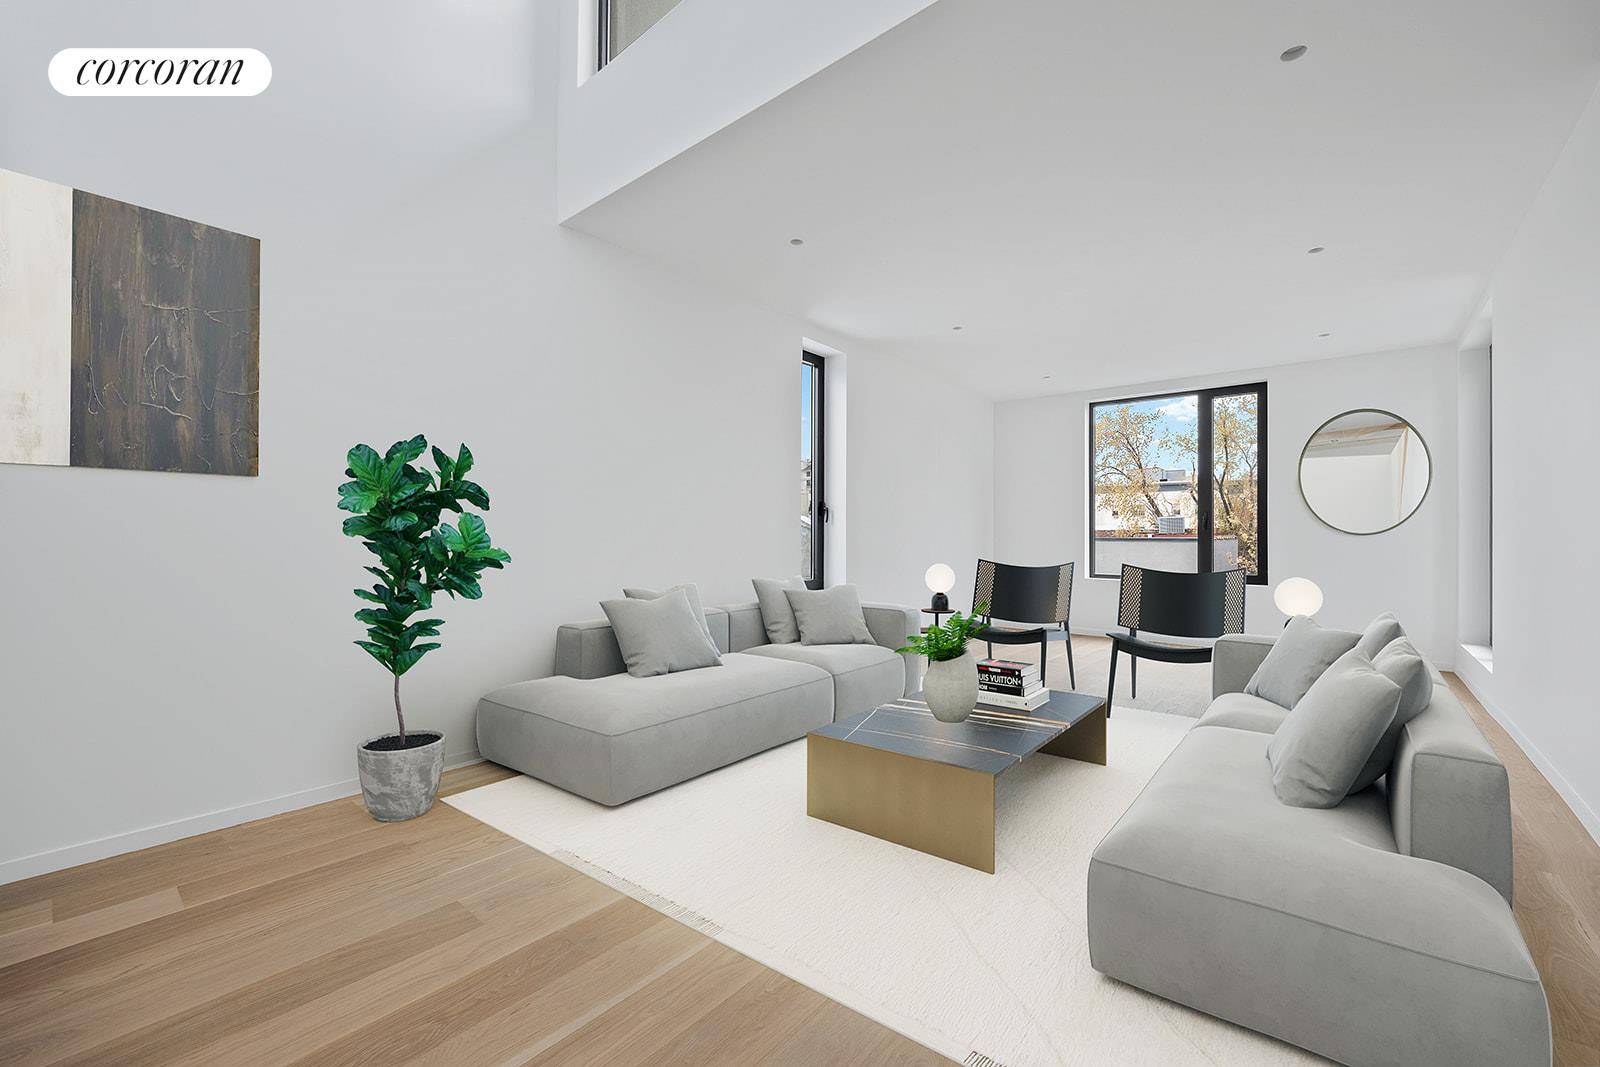 257 13th Street is a stunning new development consisting of four dreamy condos that redefine the Brooklyn boutique townhouse experience.